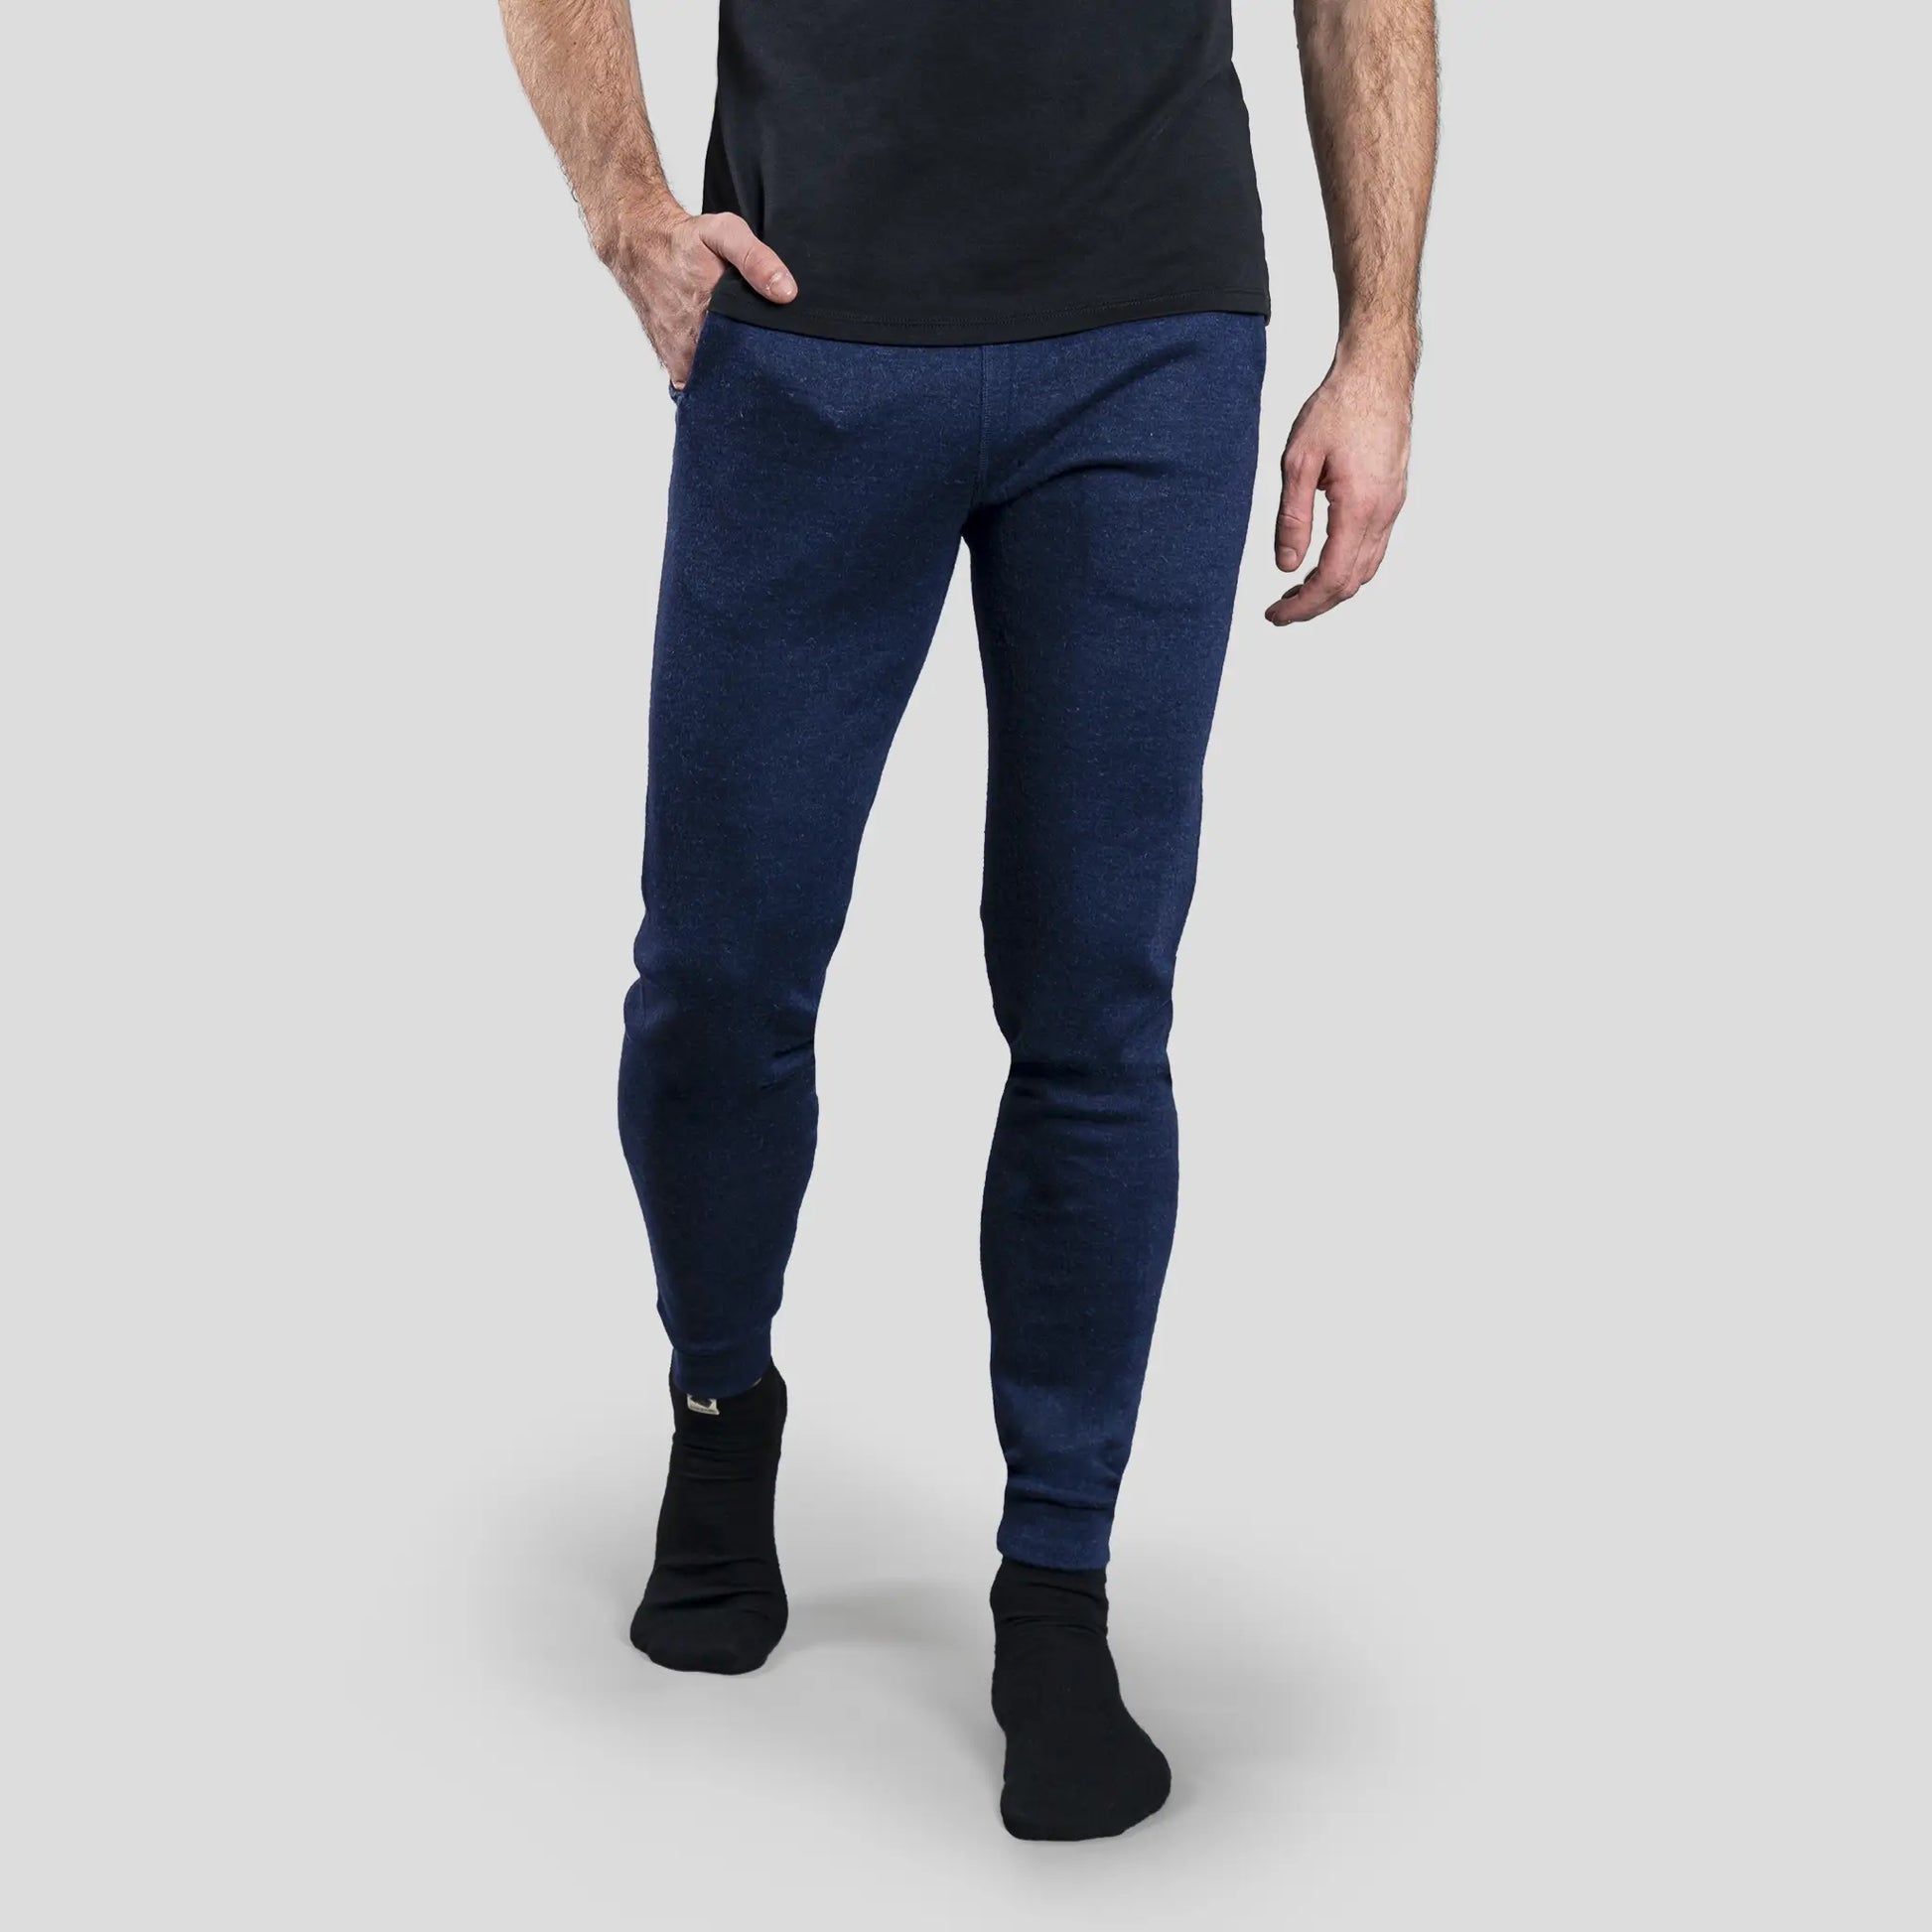 mens thermo regulate sweatpants midweight color navy blue